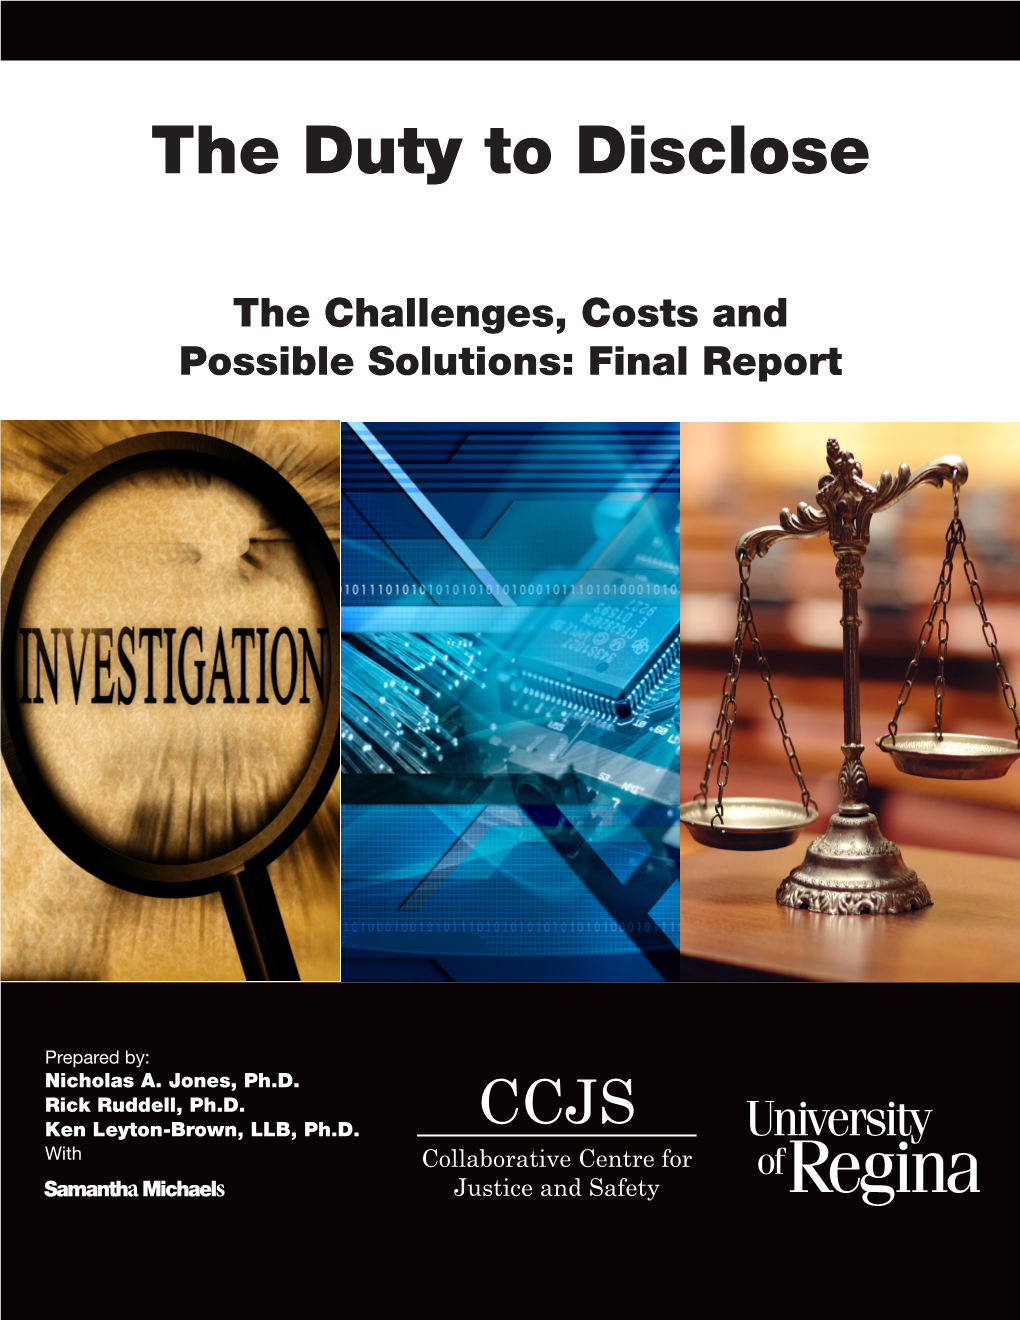 The Duty to Disclose